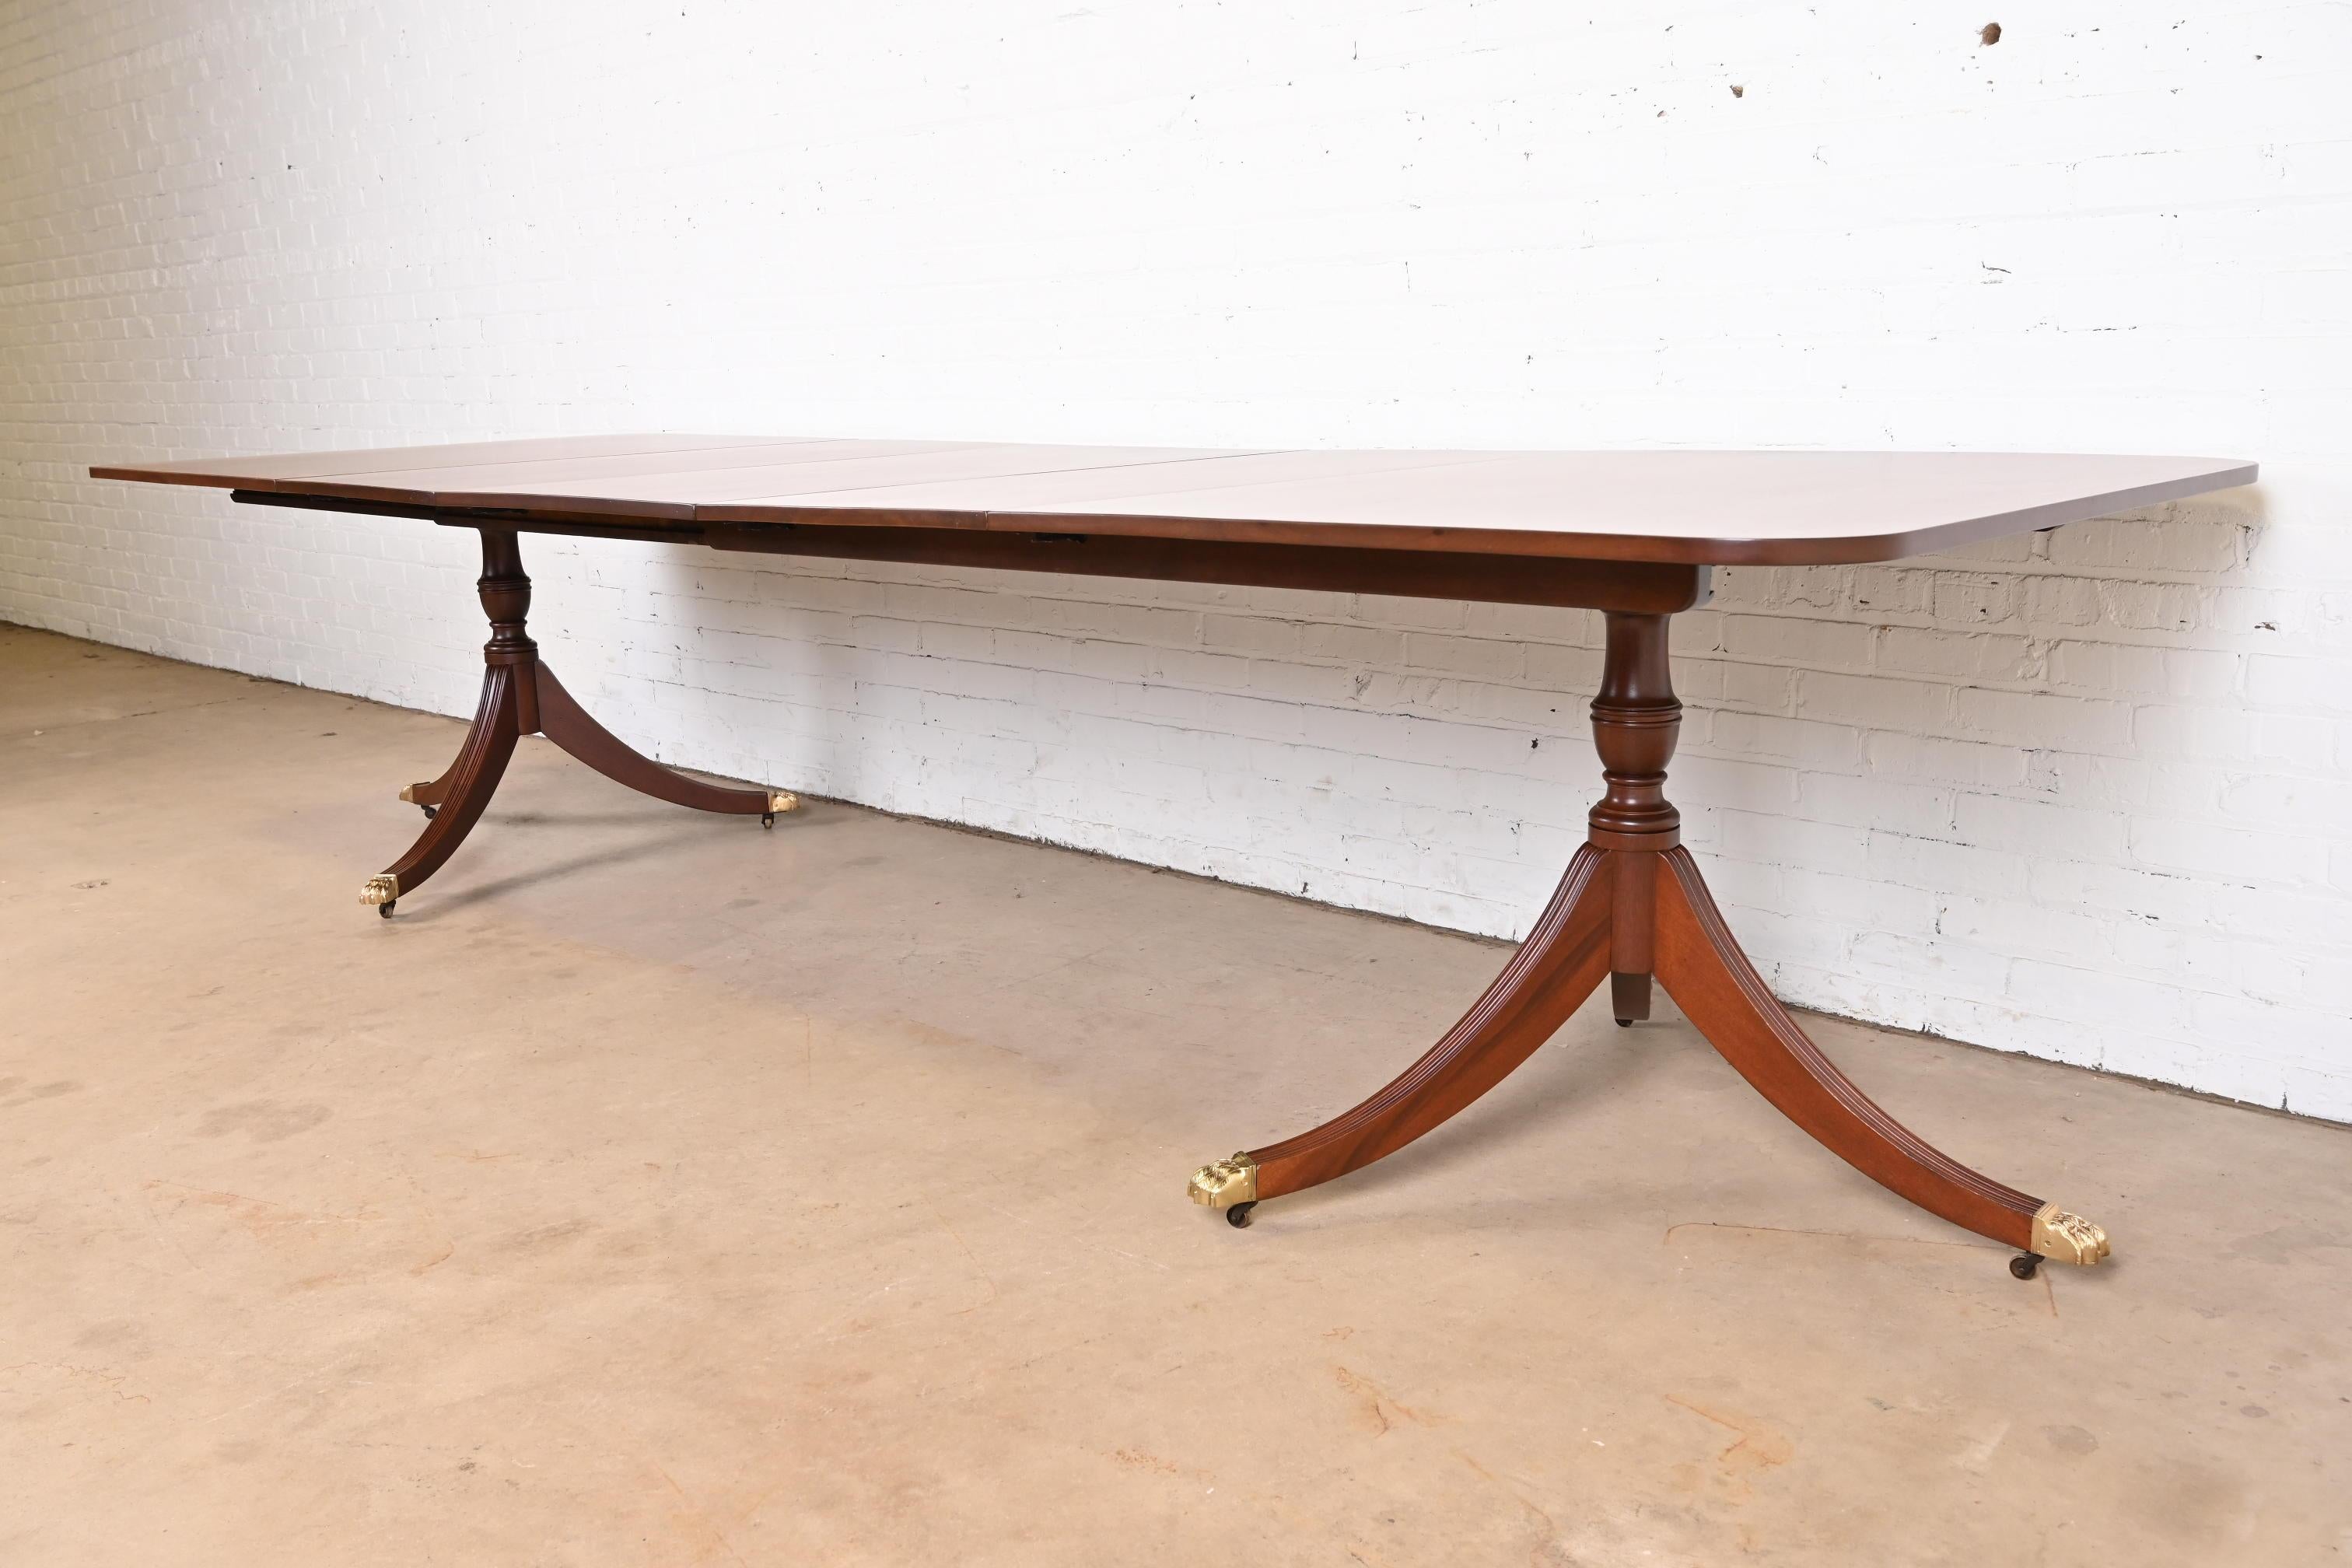 American Baker Furniture Style Georgian Mahogany Double Pedestal Dining Table, Refinished